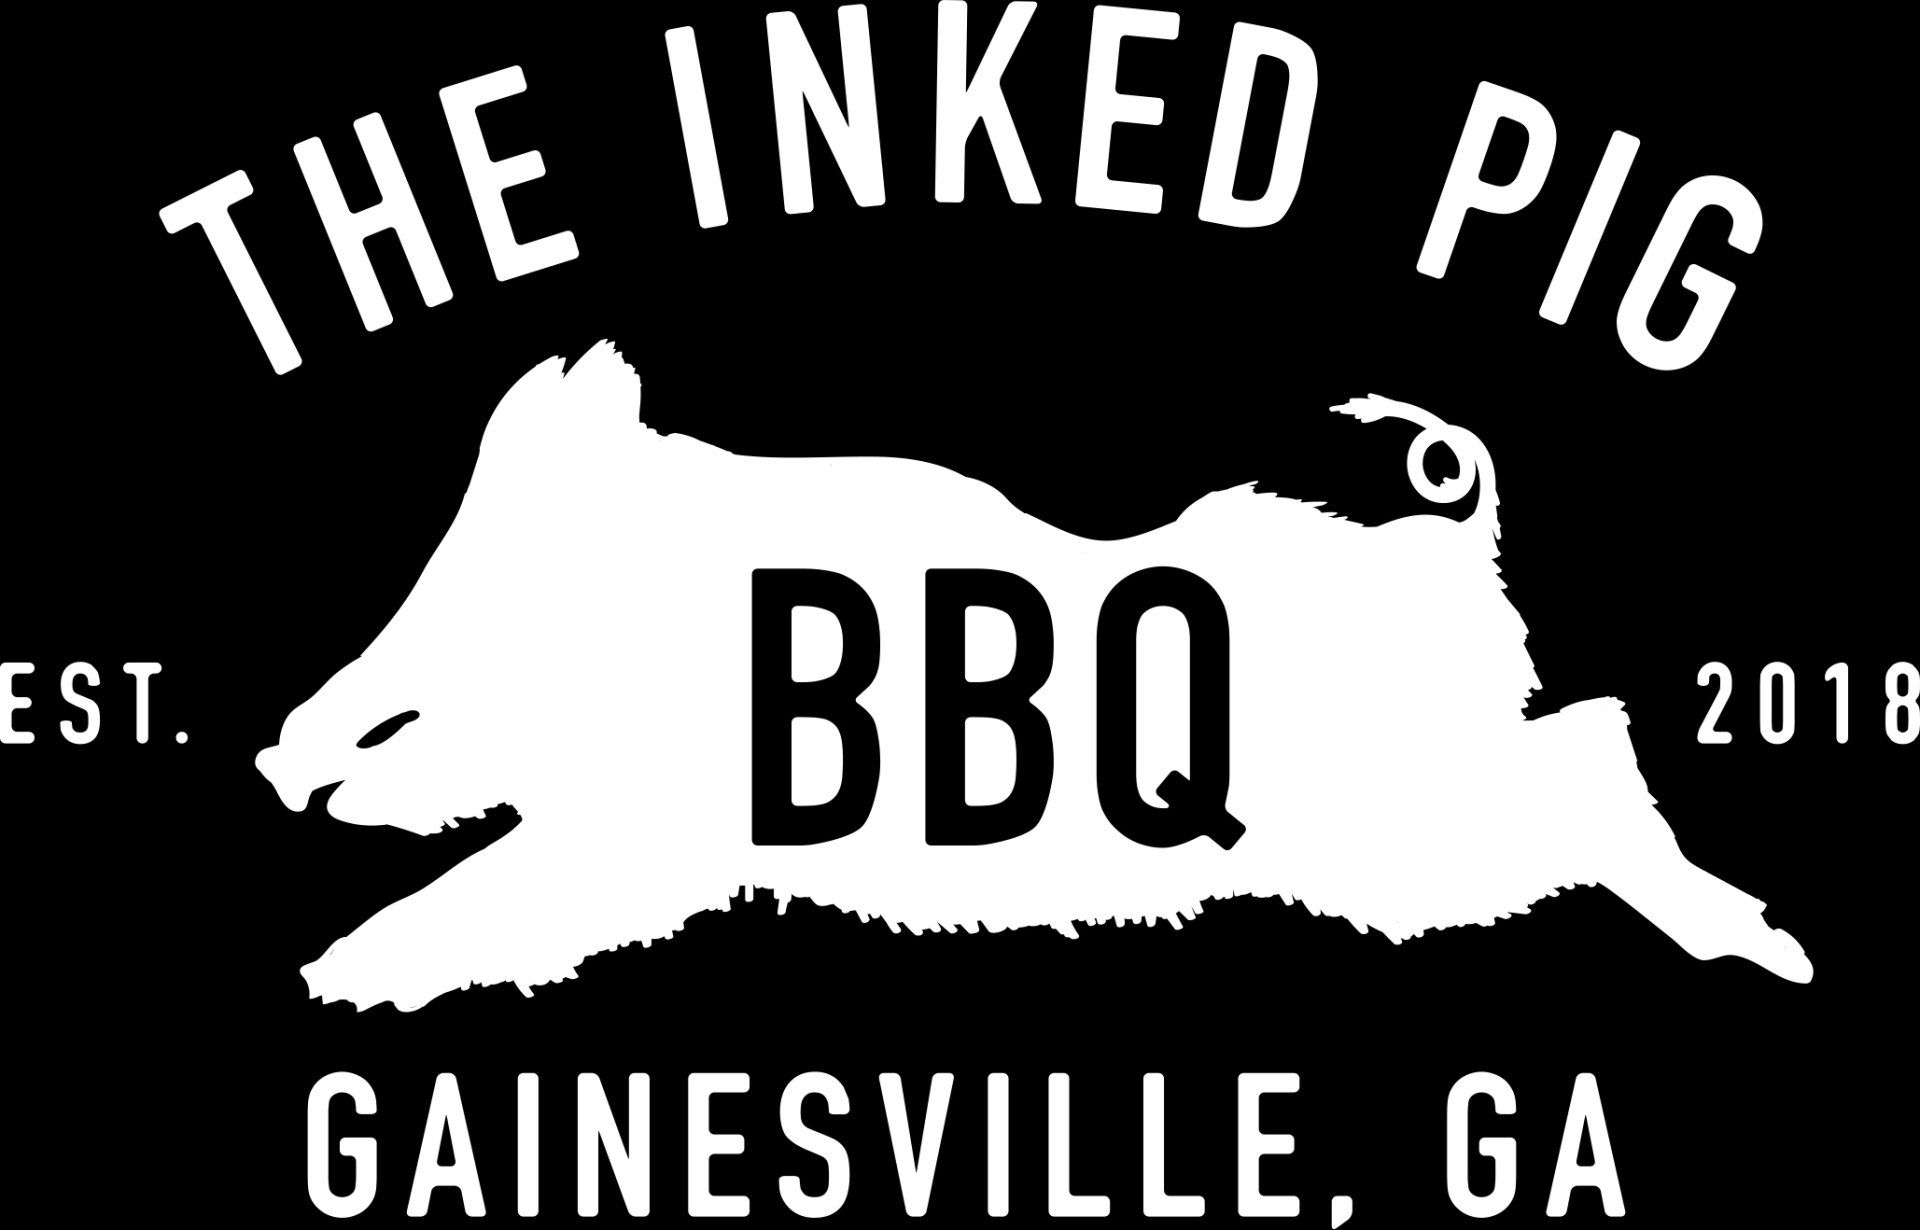 THE INKED PIG